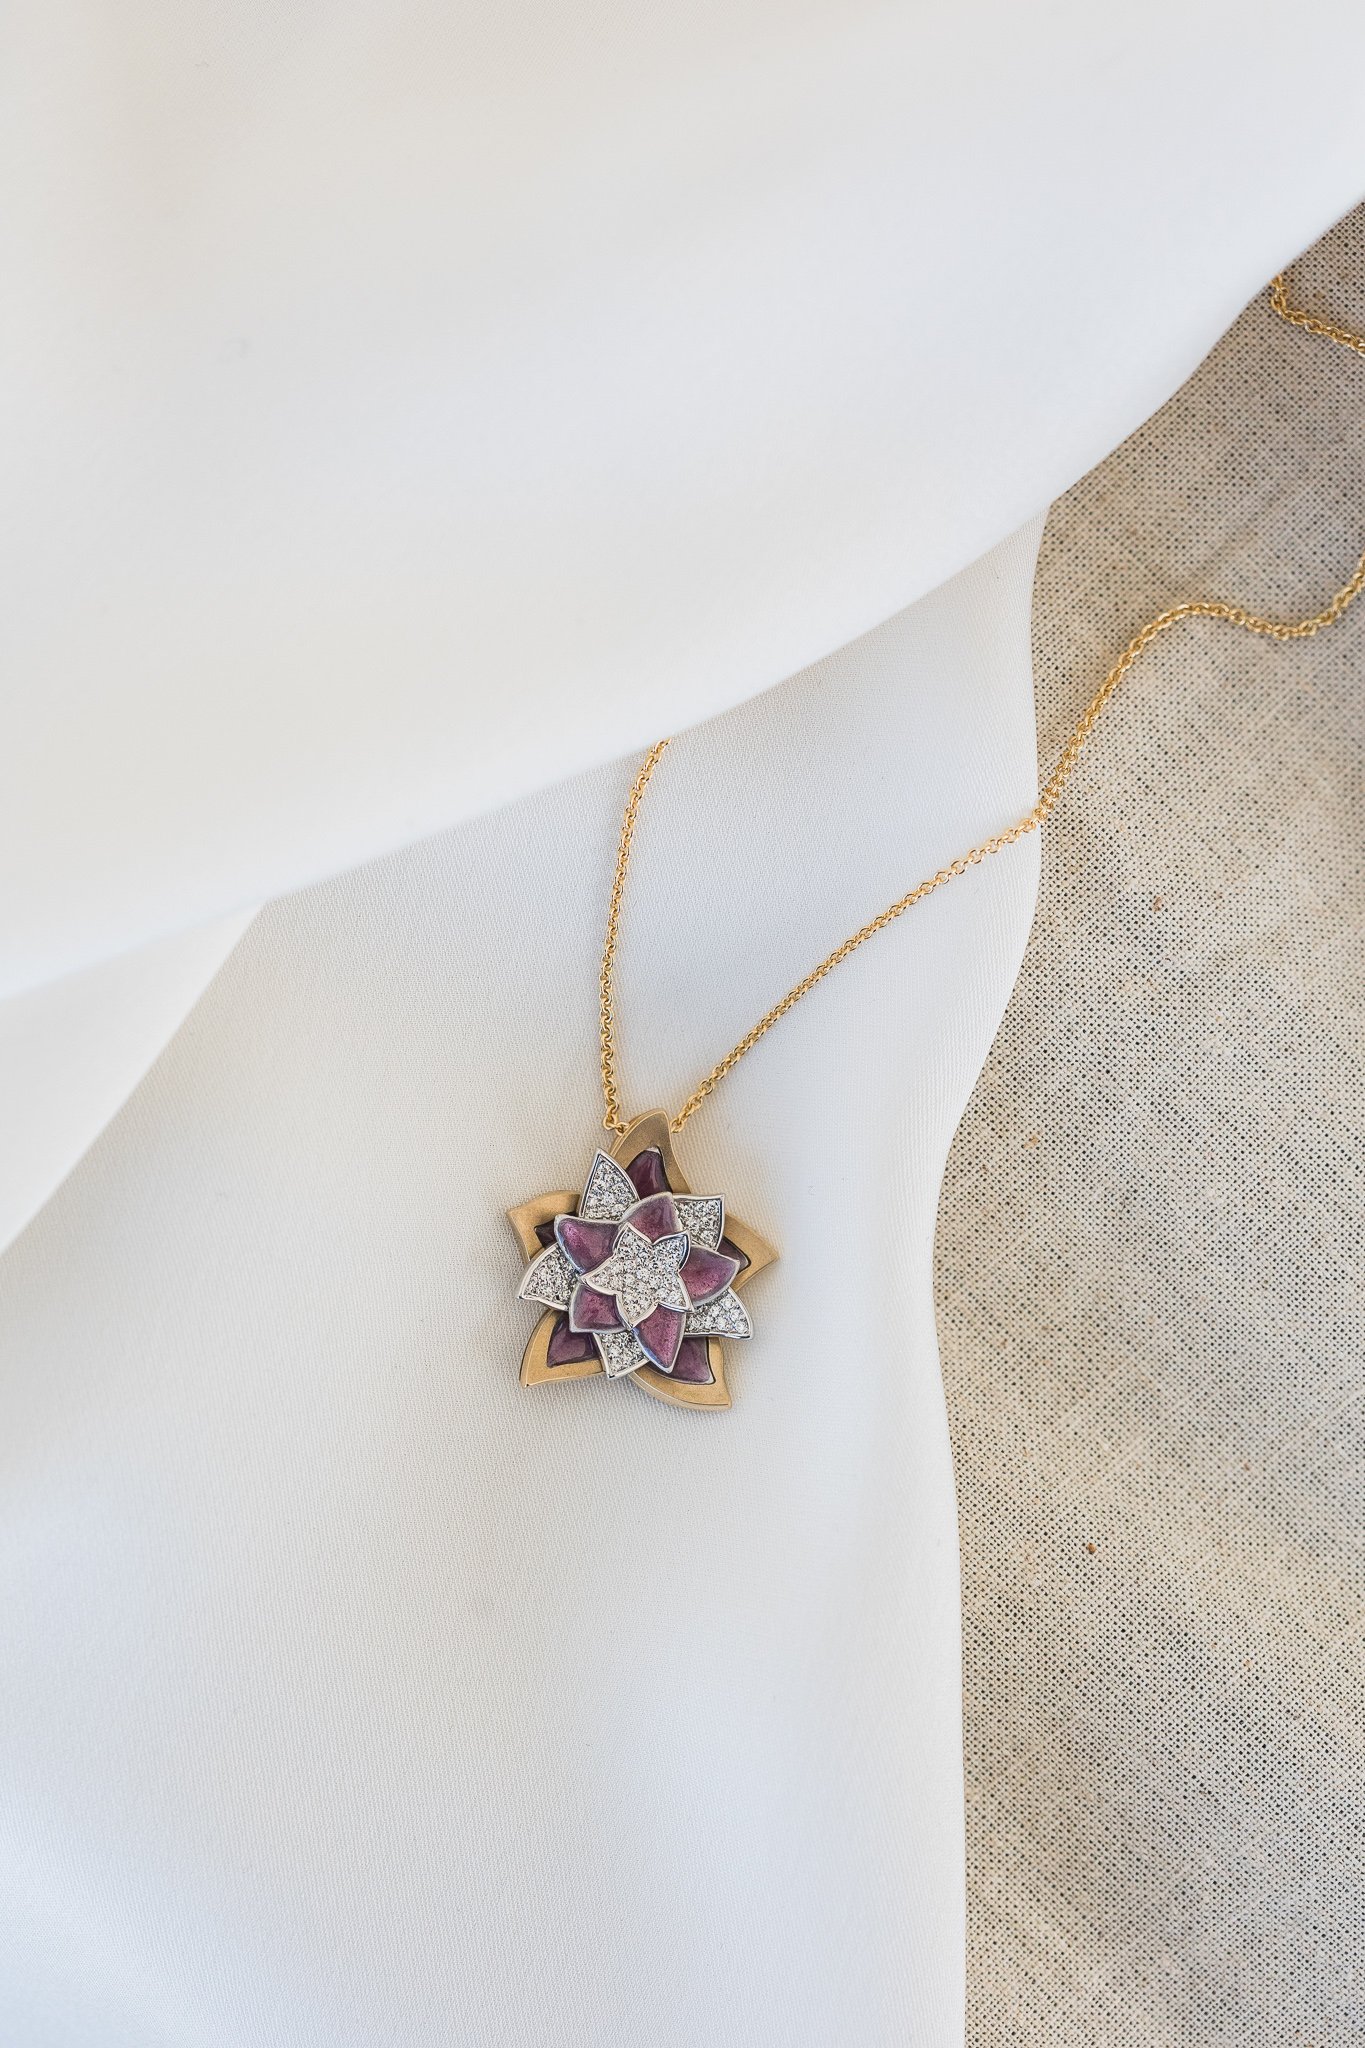 Canberra product photographer - necklace in satin